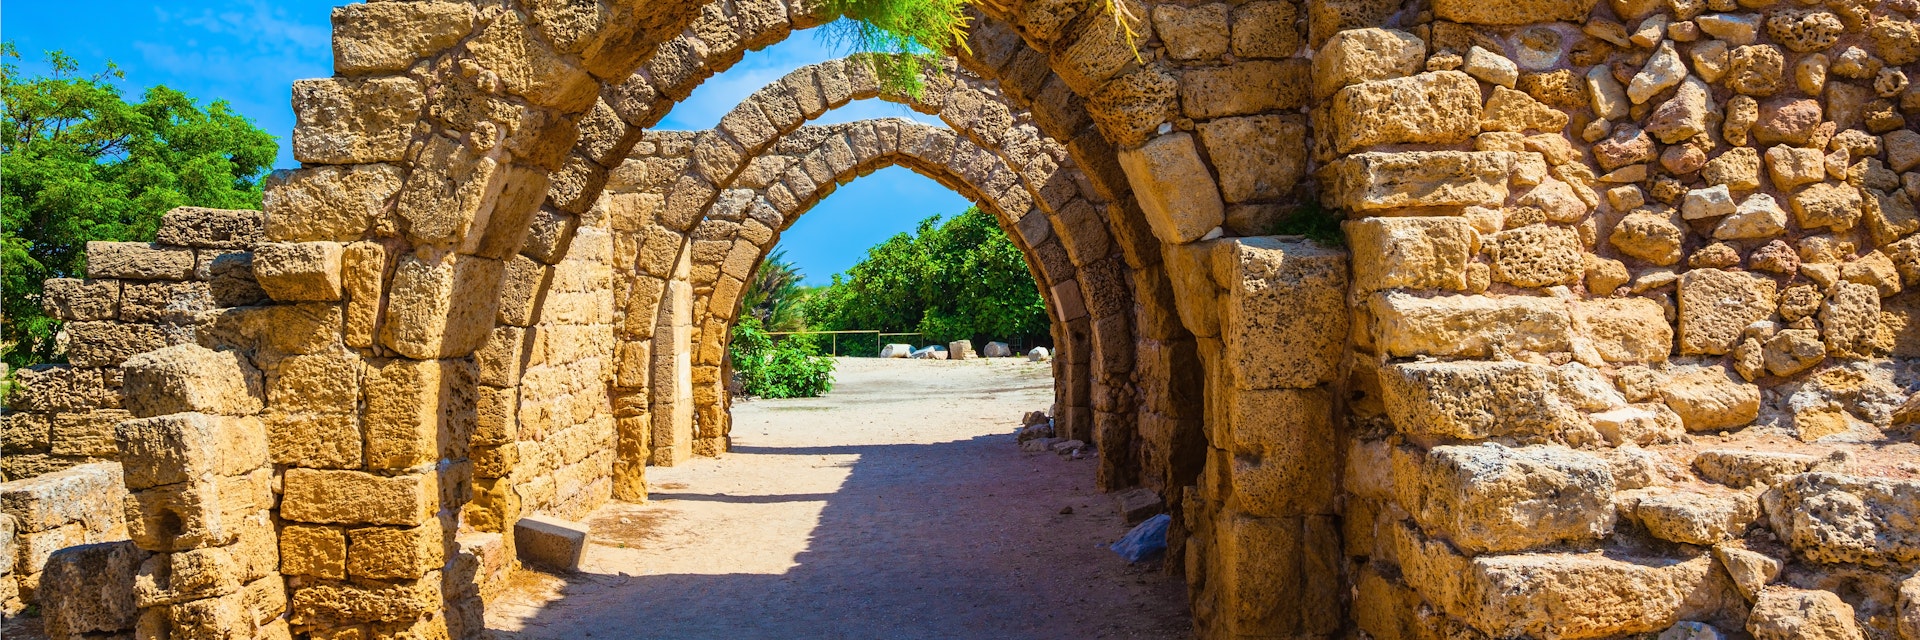 Superbly preserved ancient arched ceiling of stalls, National park Caesarea, Israel.